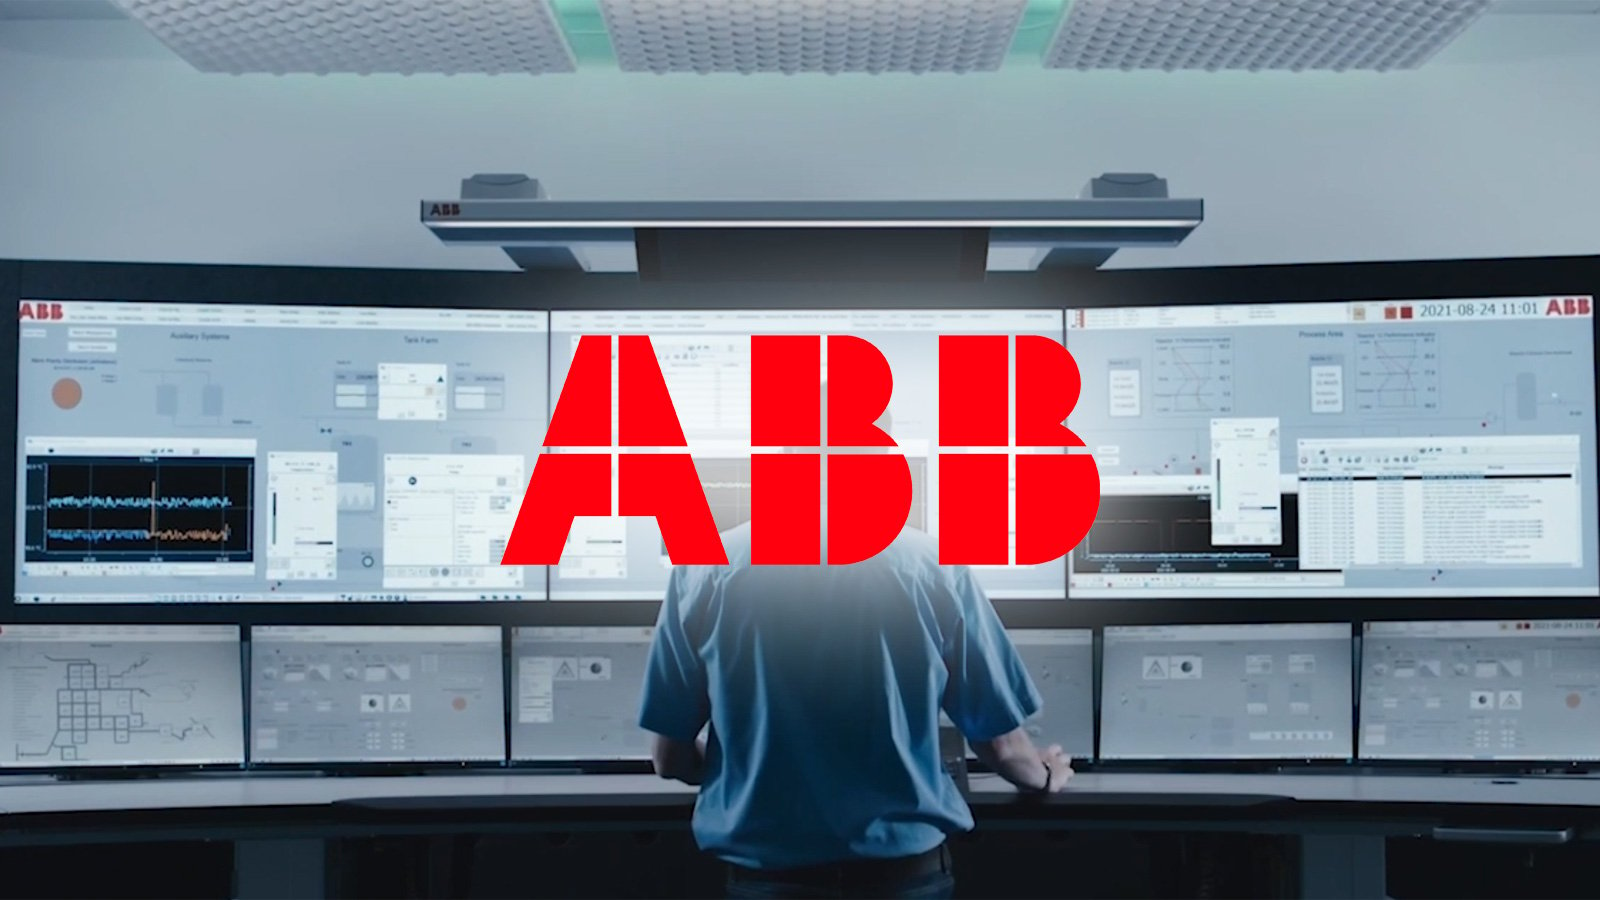 Industrial automation giant ABB disclosed data breach after ransomware attack